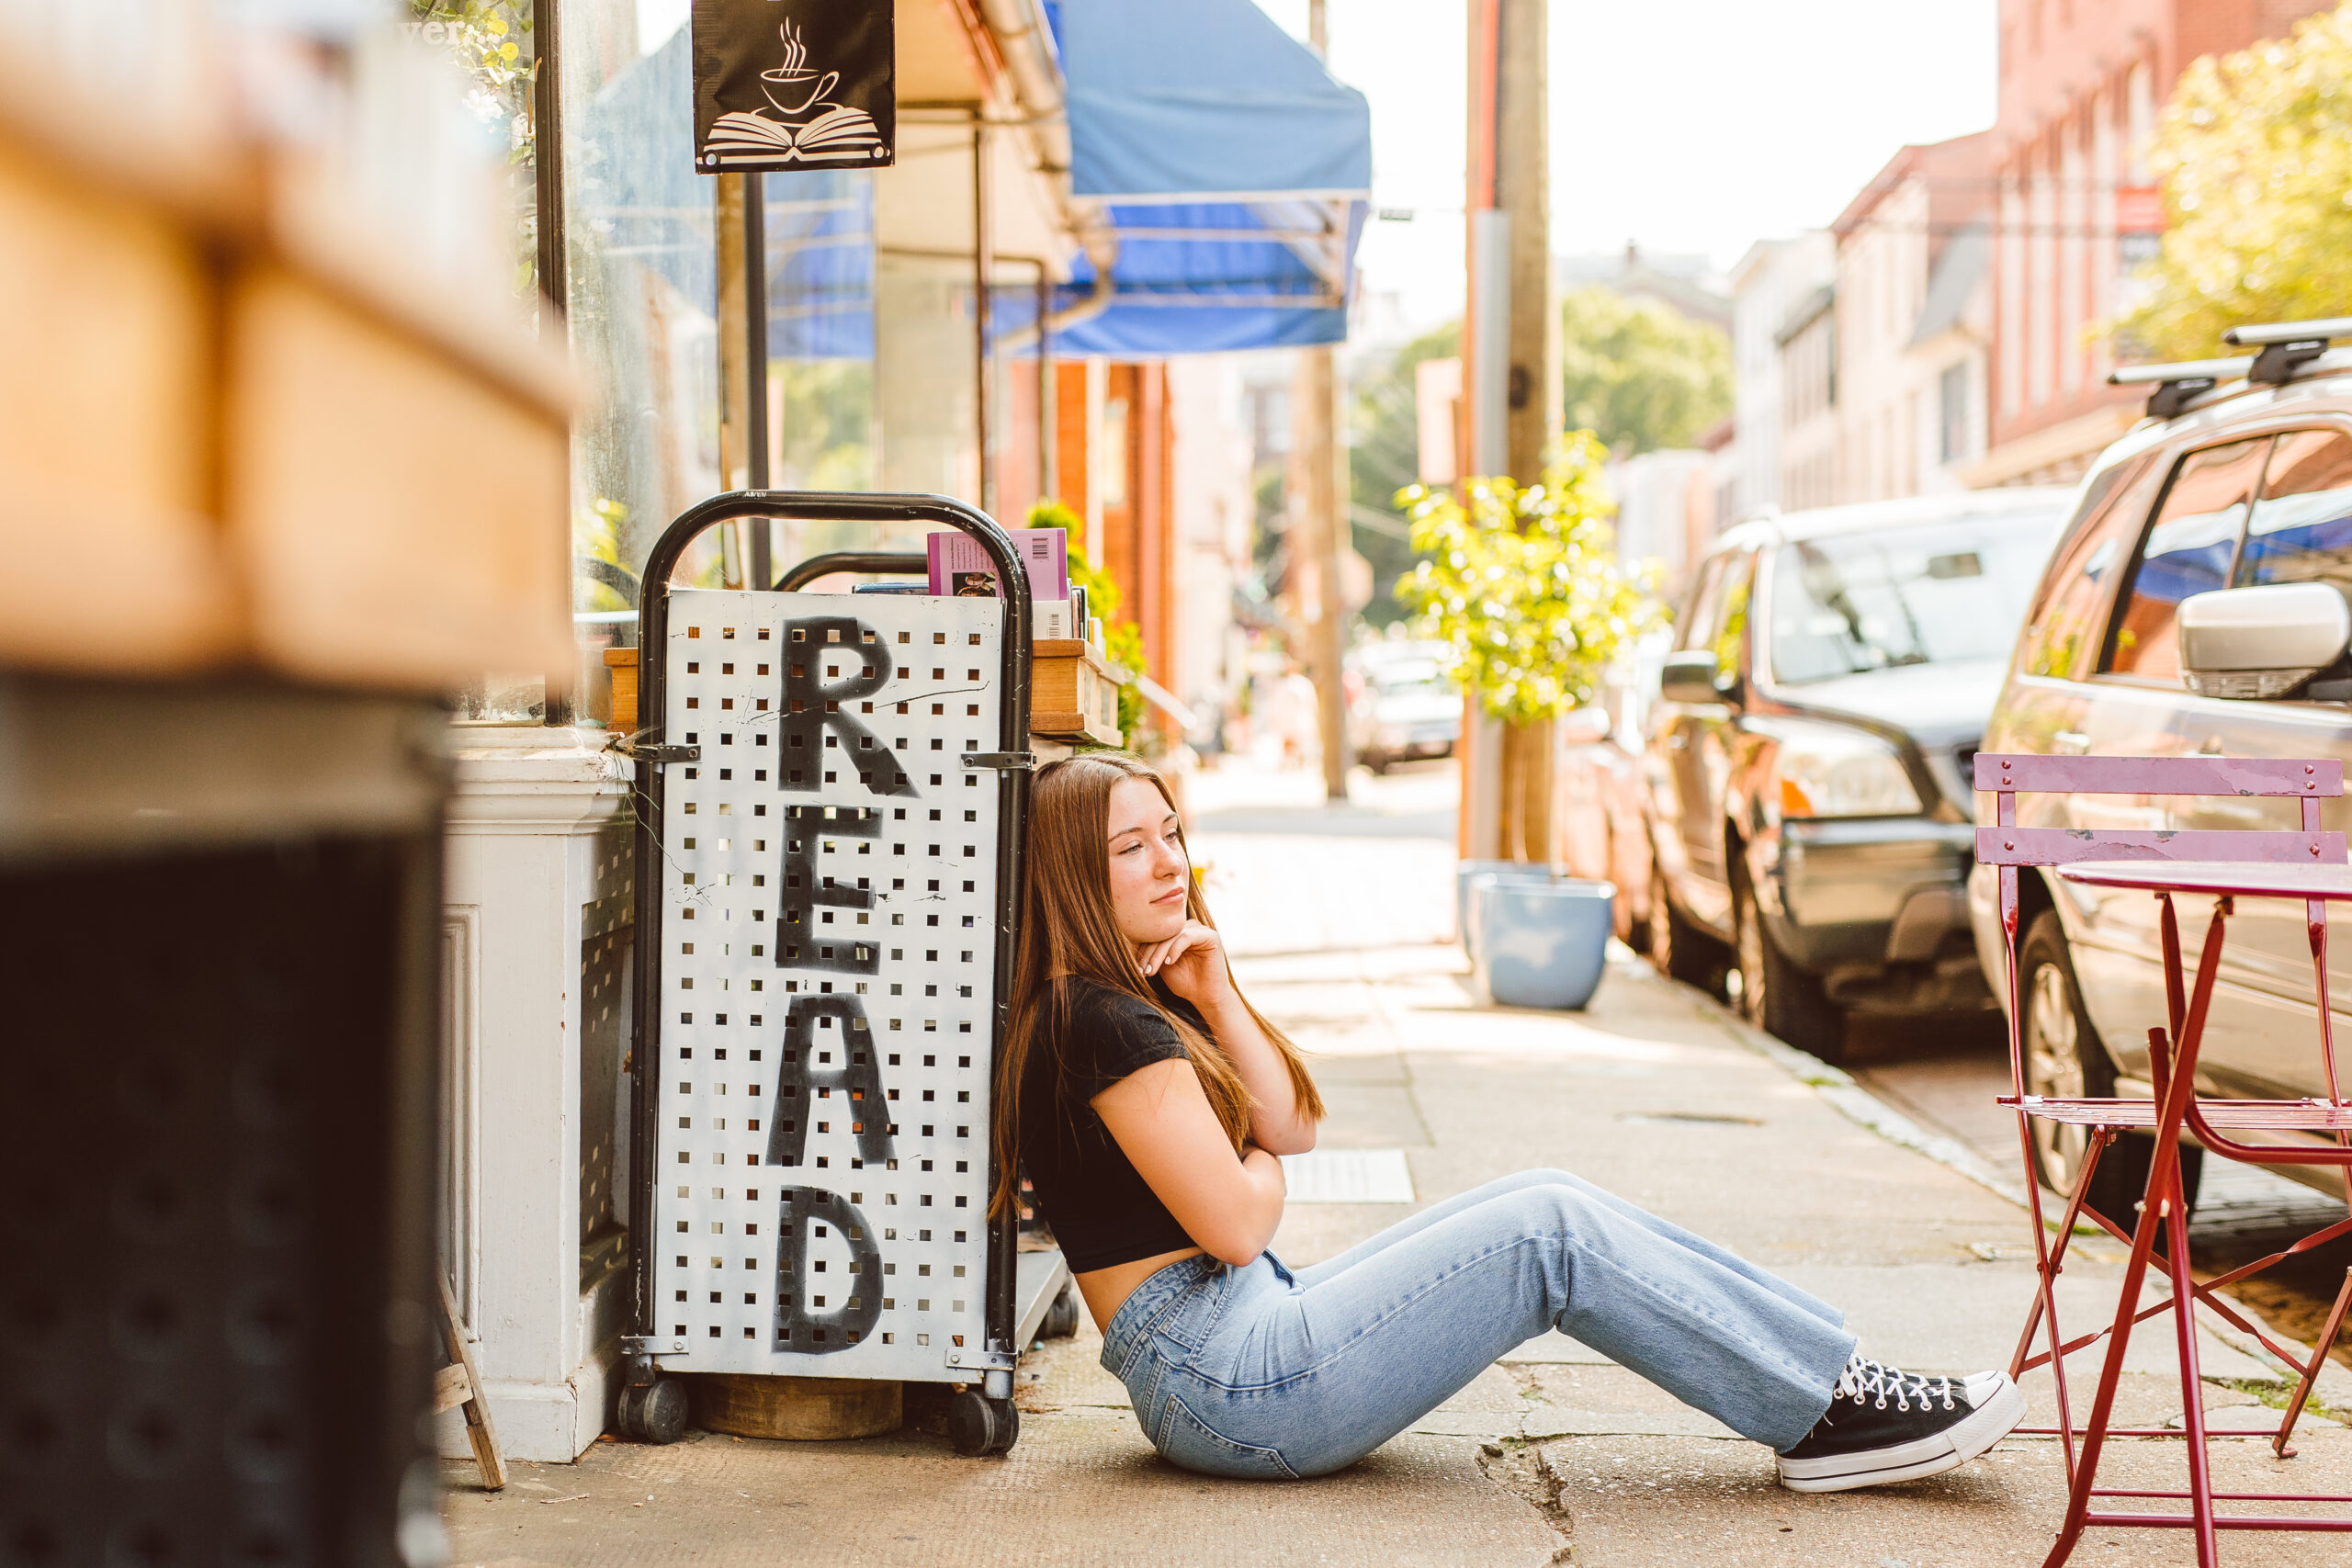 Downtown Annapolis Maryl;and senior portrait photoshoot captured by Brooke Michelle Photo - Annapolis Photographer